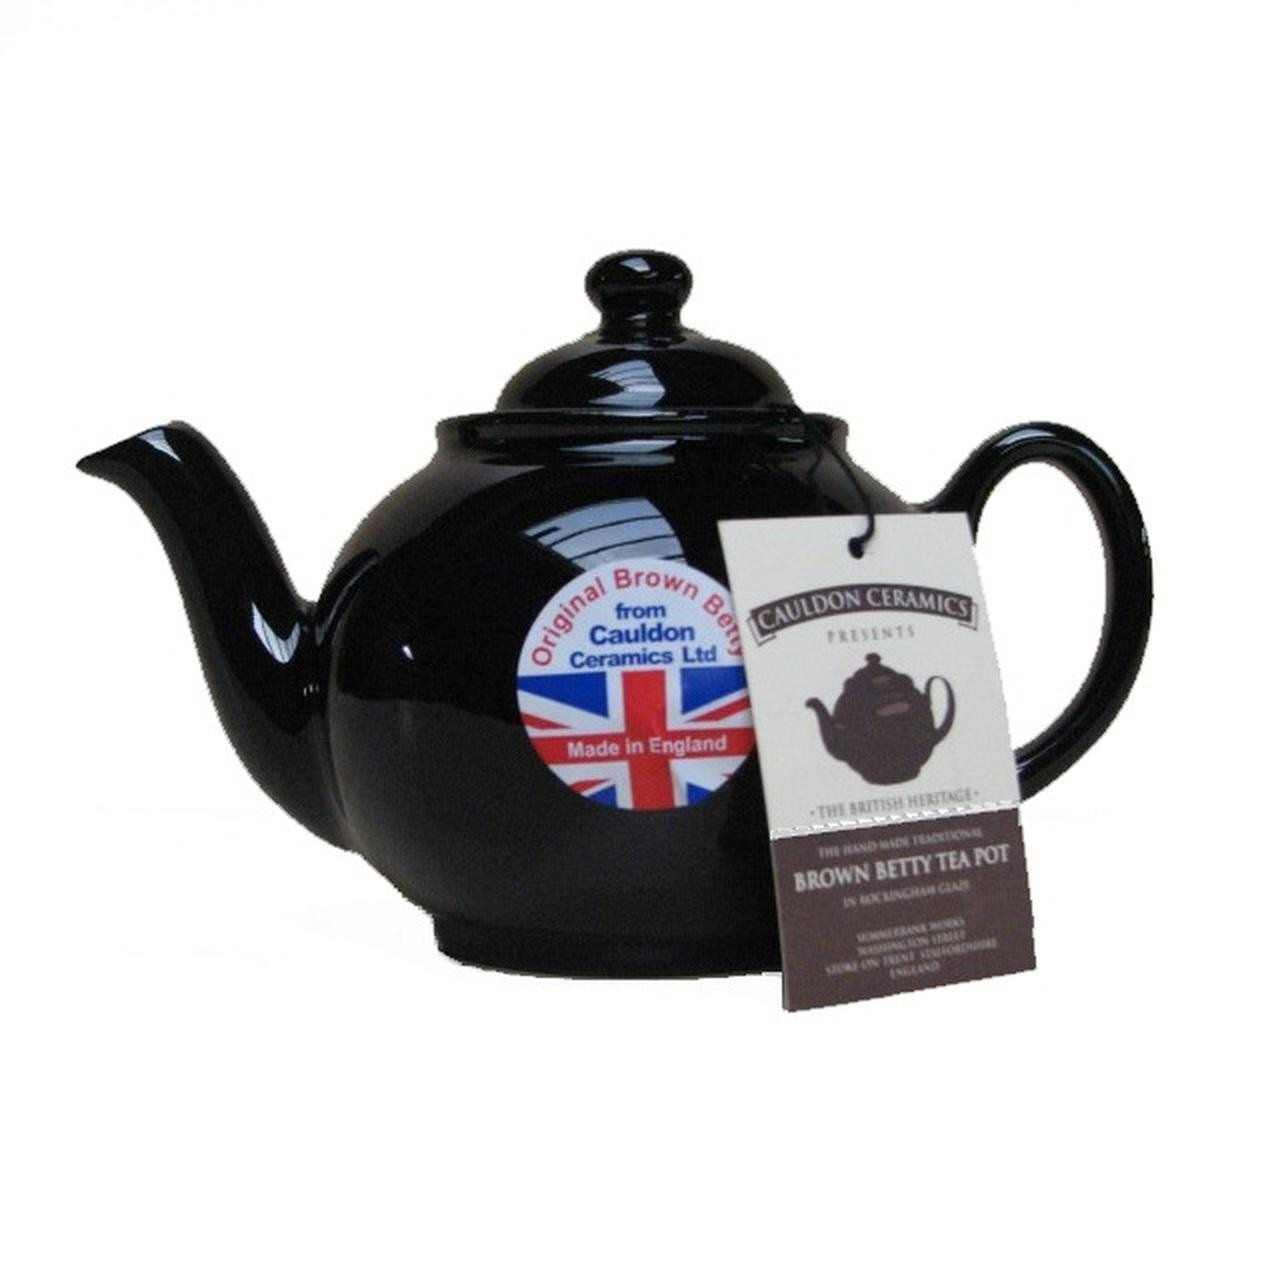 Brown Betty 4 Cup Teapot